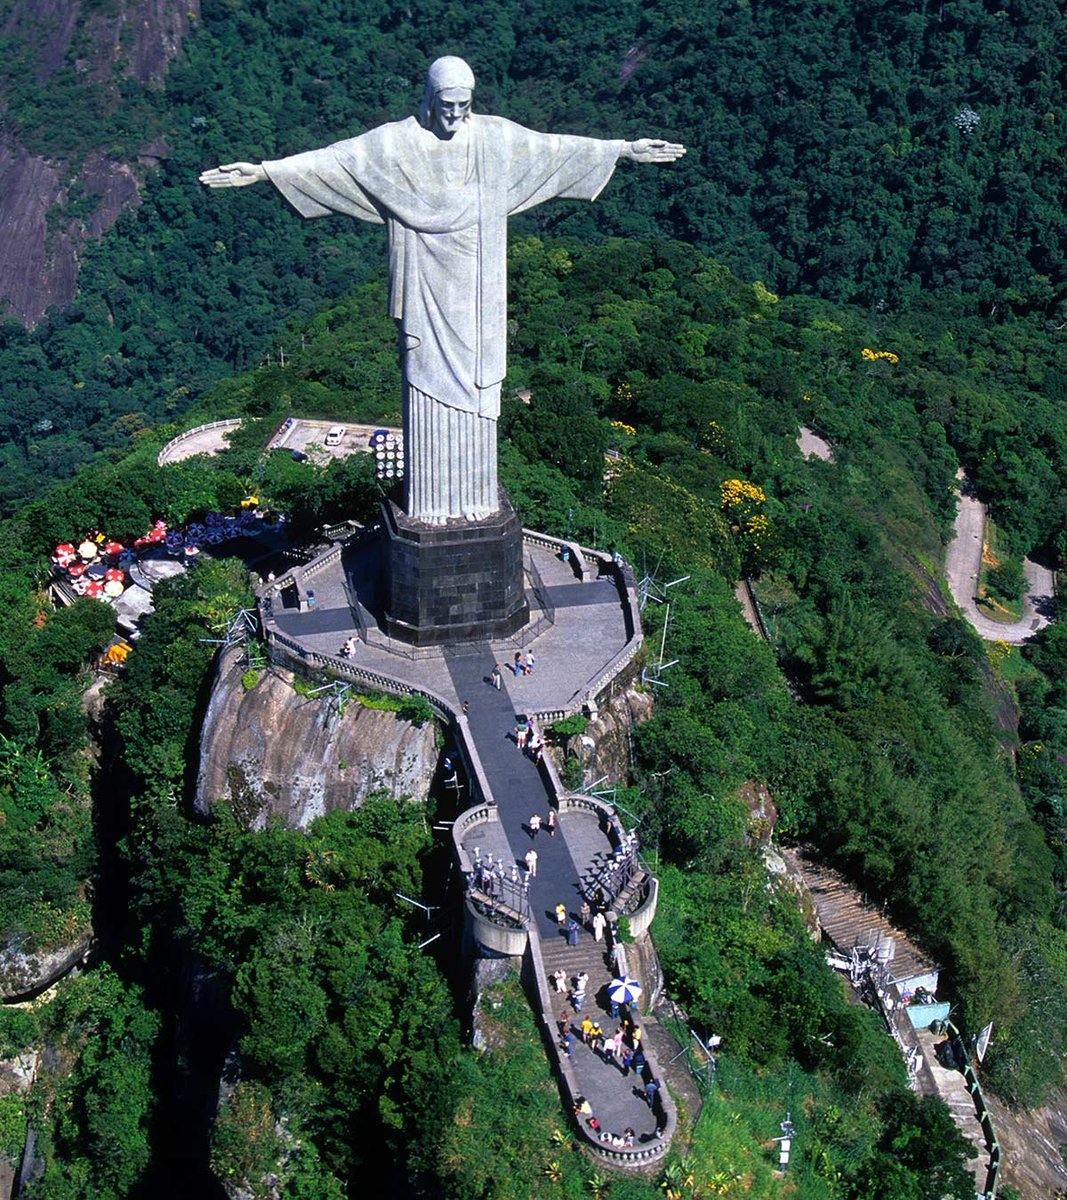 Hobi As Christ the Redeemer Statue, Rio de Janeiro: The Art Deco-style Christ the Redeemer statue has been looming over the Brazilians from upon Corcovado mountain nurturing them! Who nurtures BTS and ARMY more than Hobi? He lights us up with positivity!   #BTSARMY  @BTS_twt